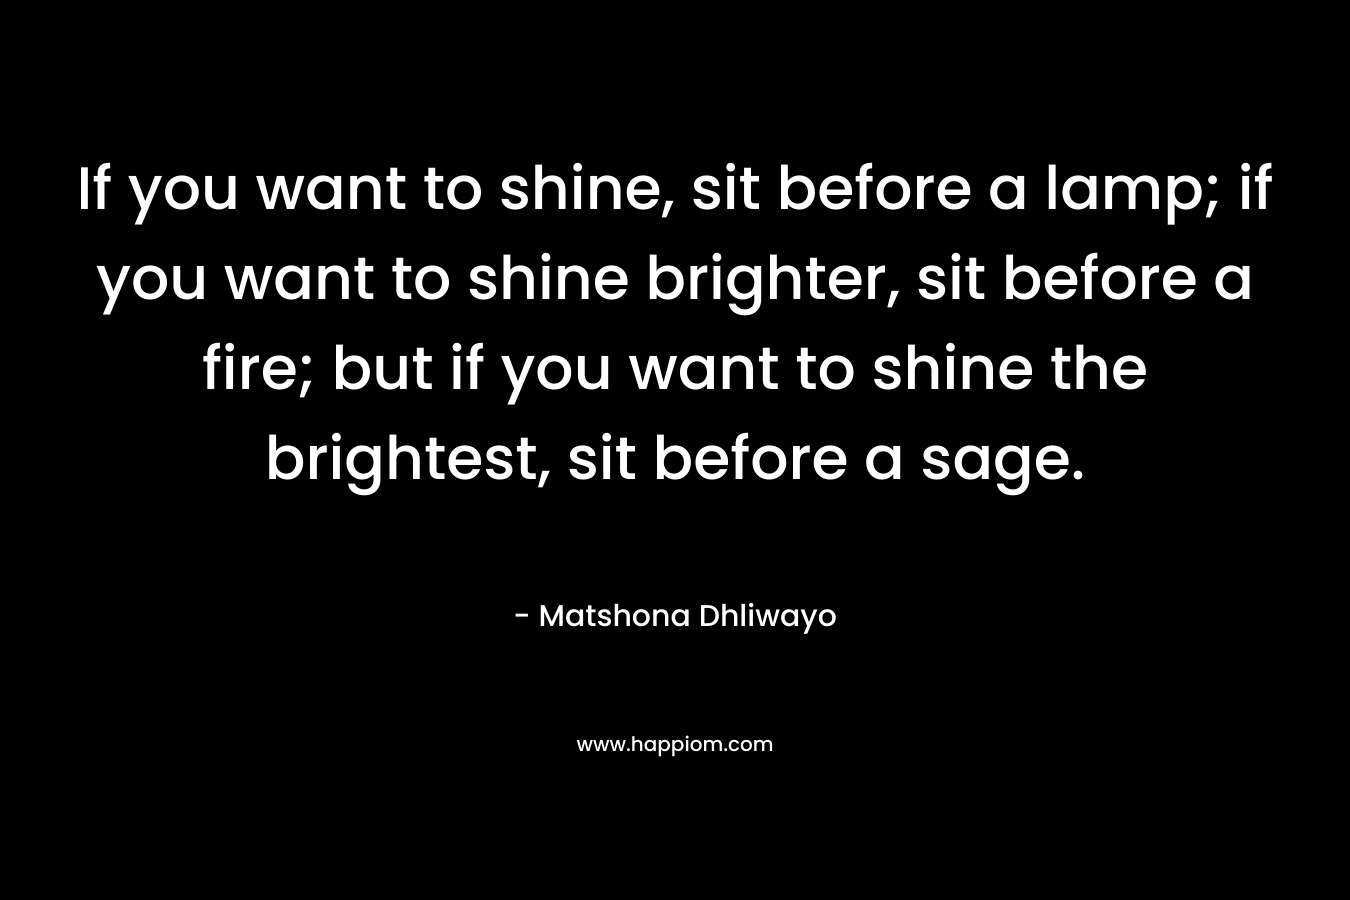 If you want to shine, sit before a lamp; if you want to shine brighter, sit before a fire; but if you want to shine the brightest, sit before a sage.